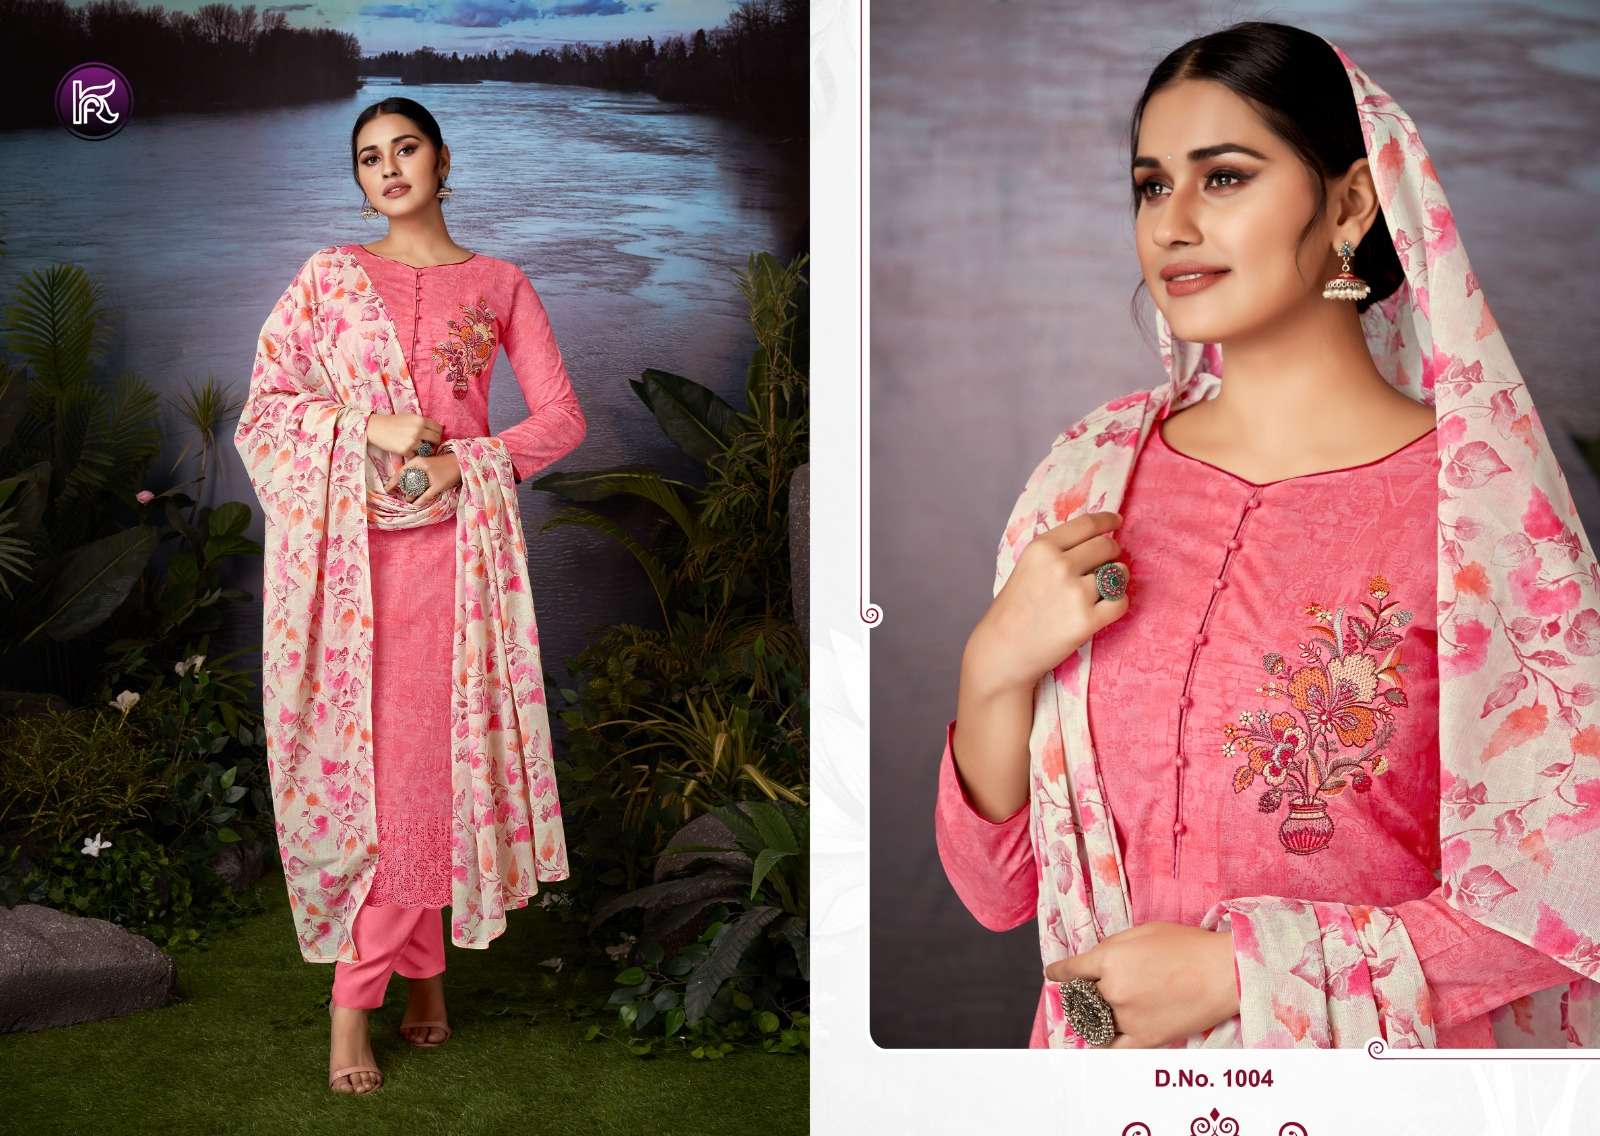 Kala Rangez By Kala Fashion 1001 To 1006 Series Beautiful Festive Suits Colorful Stylish Fancy Casual Wear & Ethnic Wear Lawn Cotton Dresses At Wholesale Price